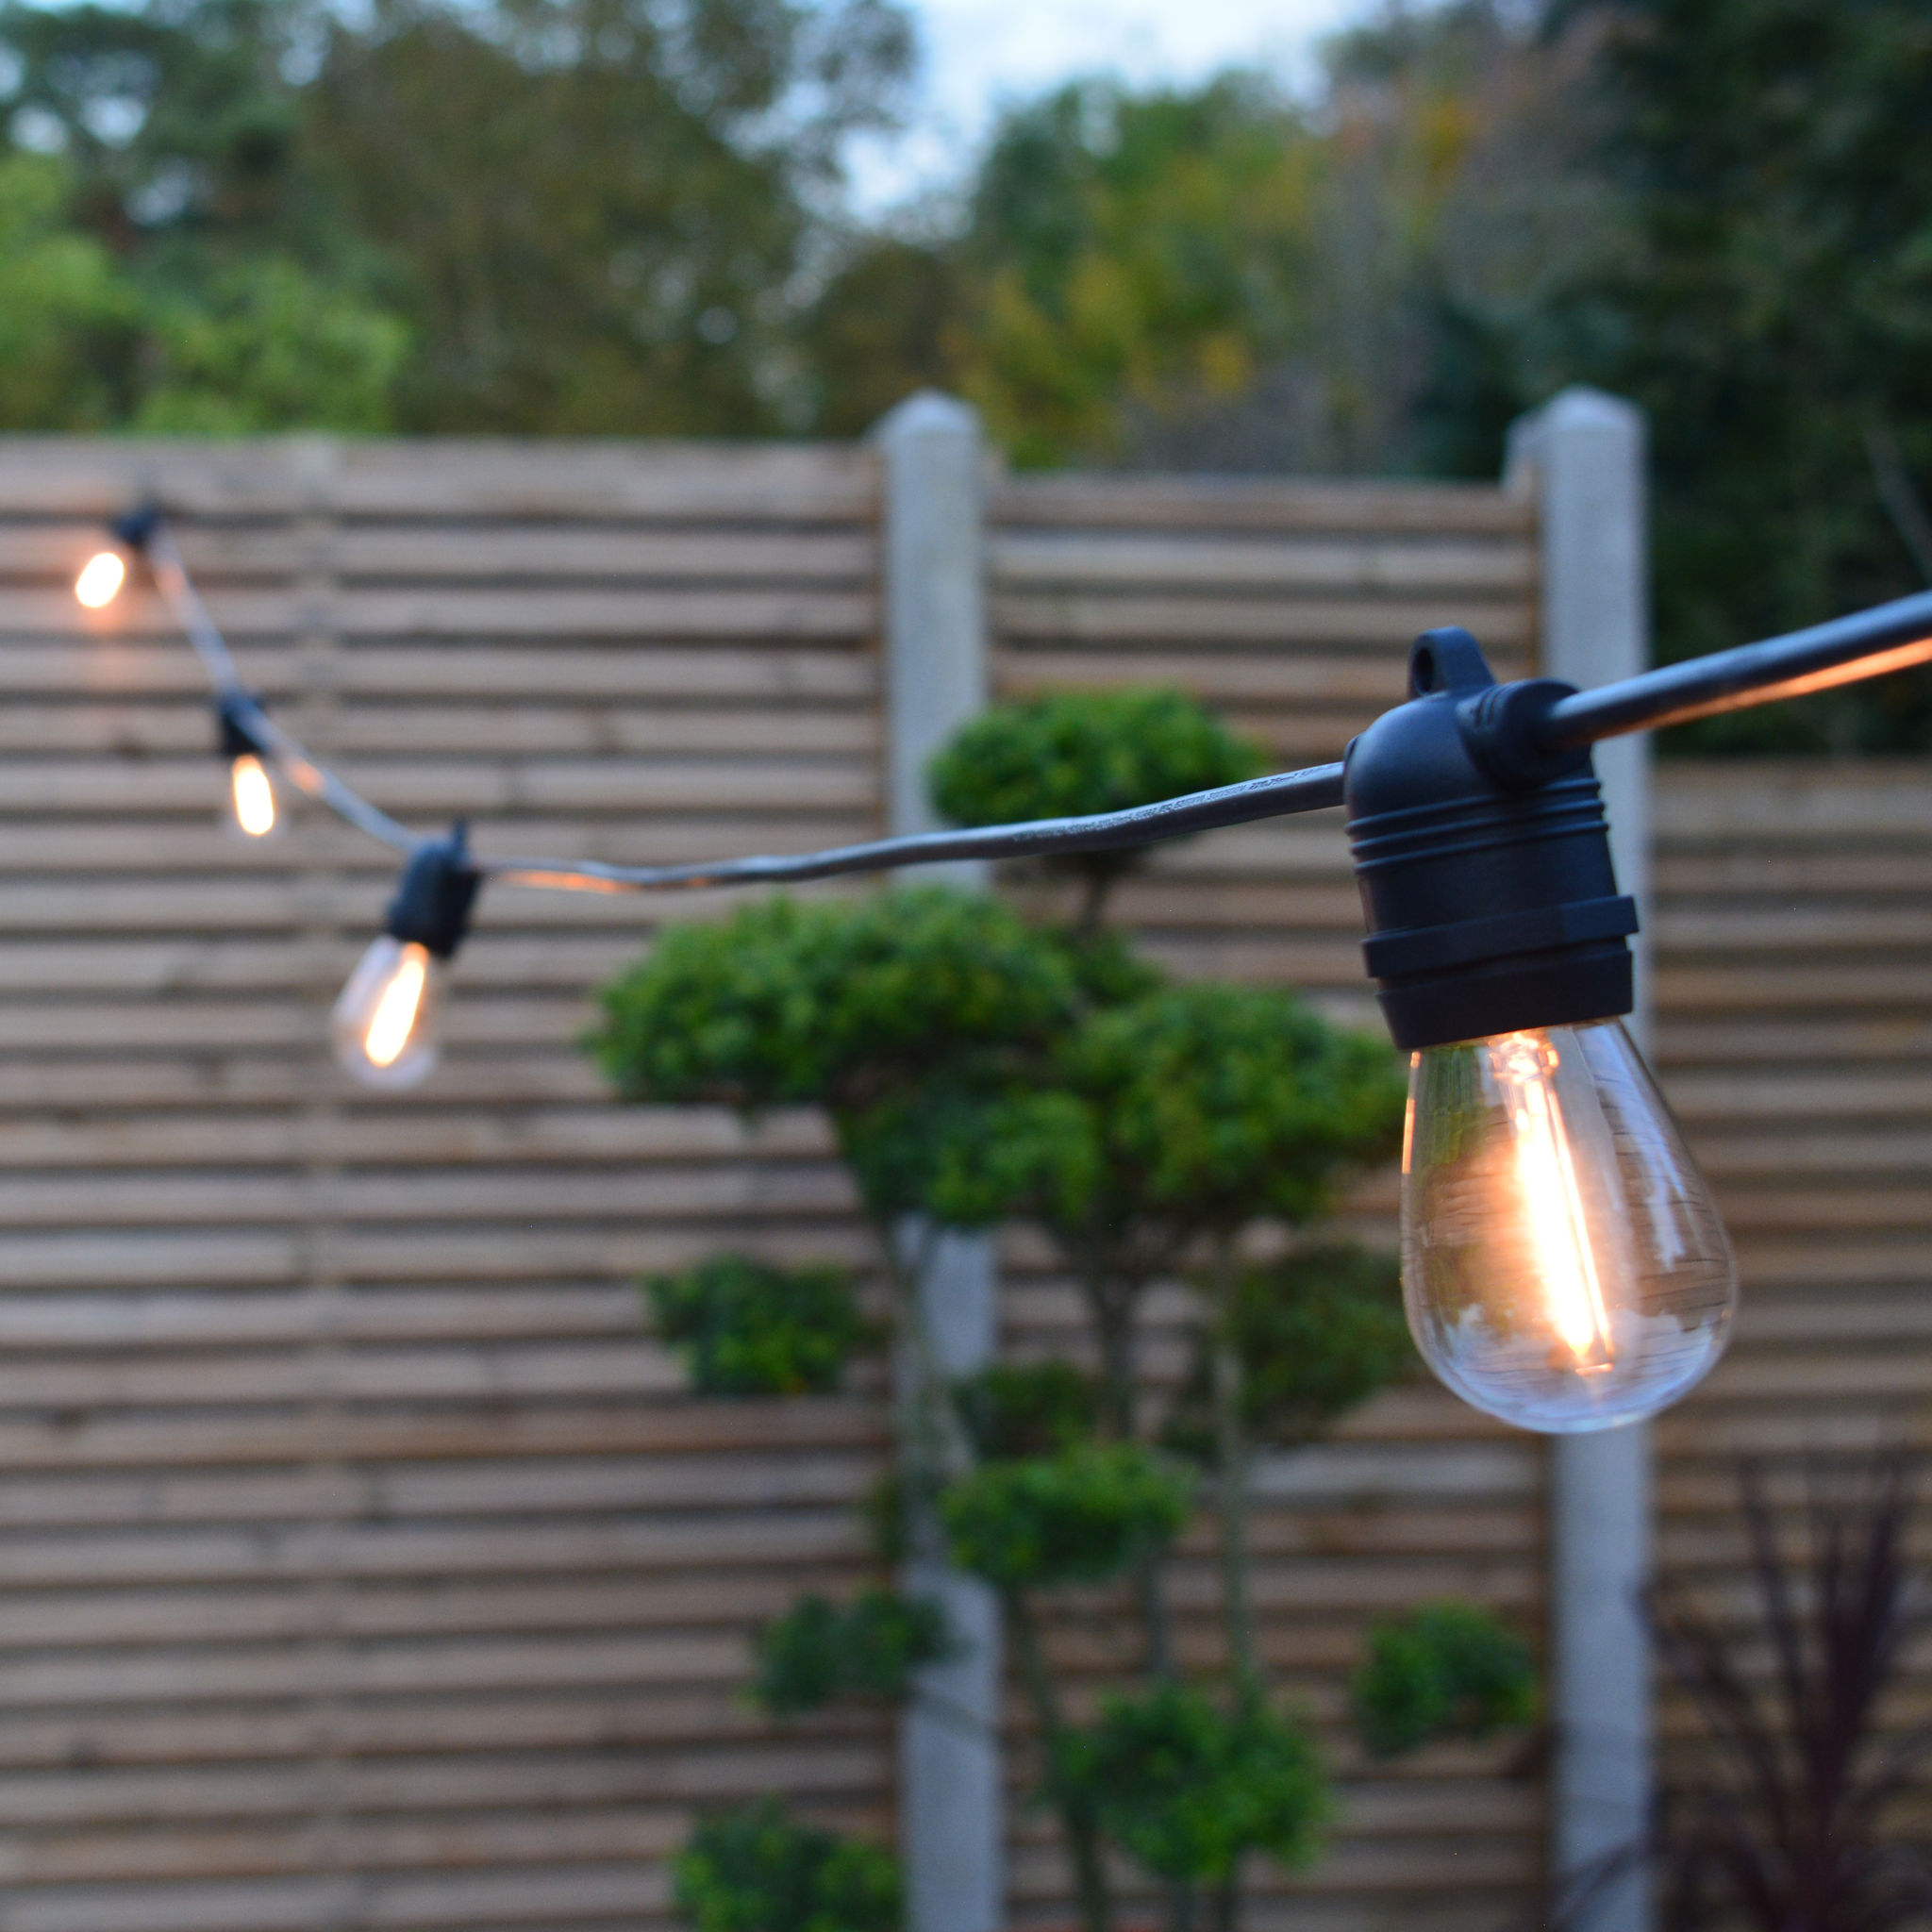 50m Connectable Outdoor String Lights - Fixed Sockets with 50 led bulbs - The Outside Lighting Specialists